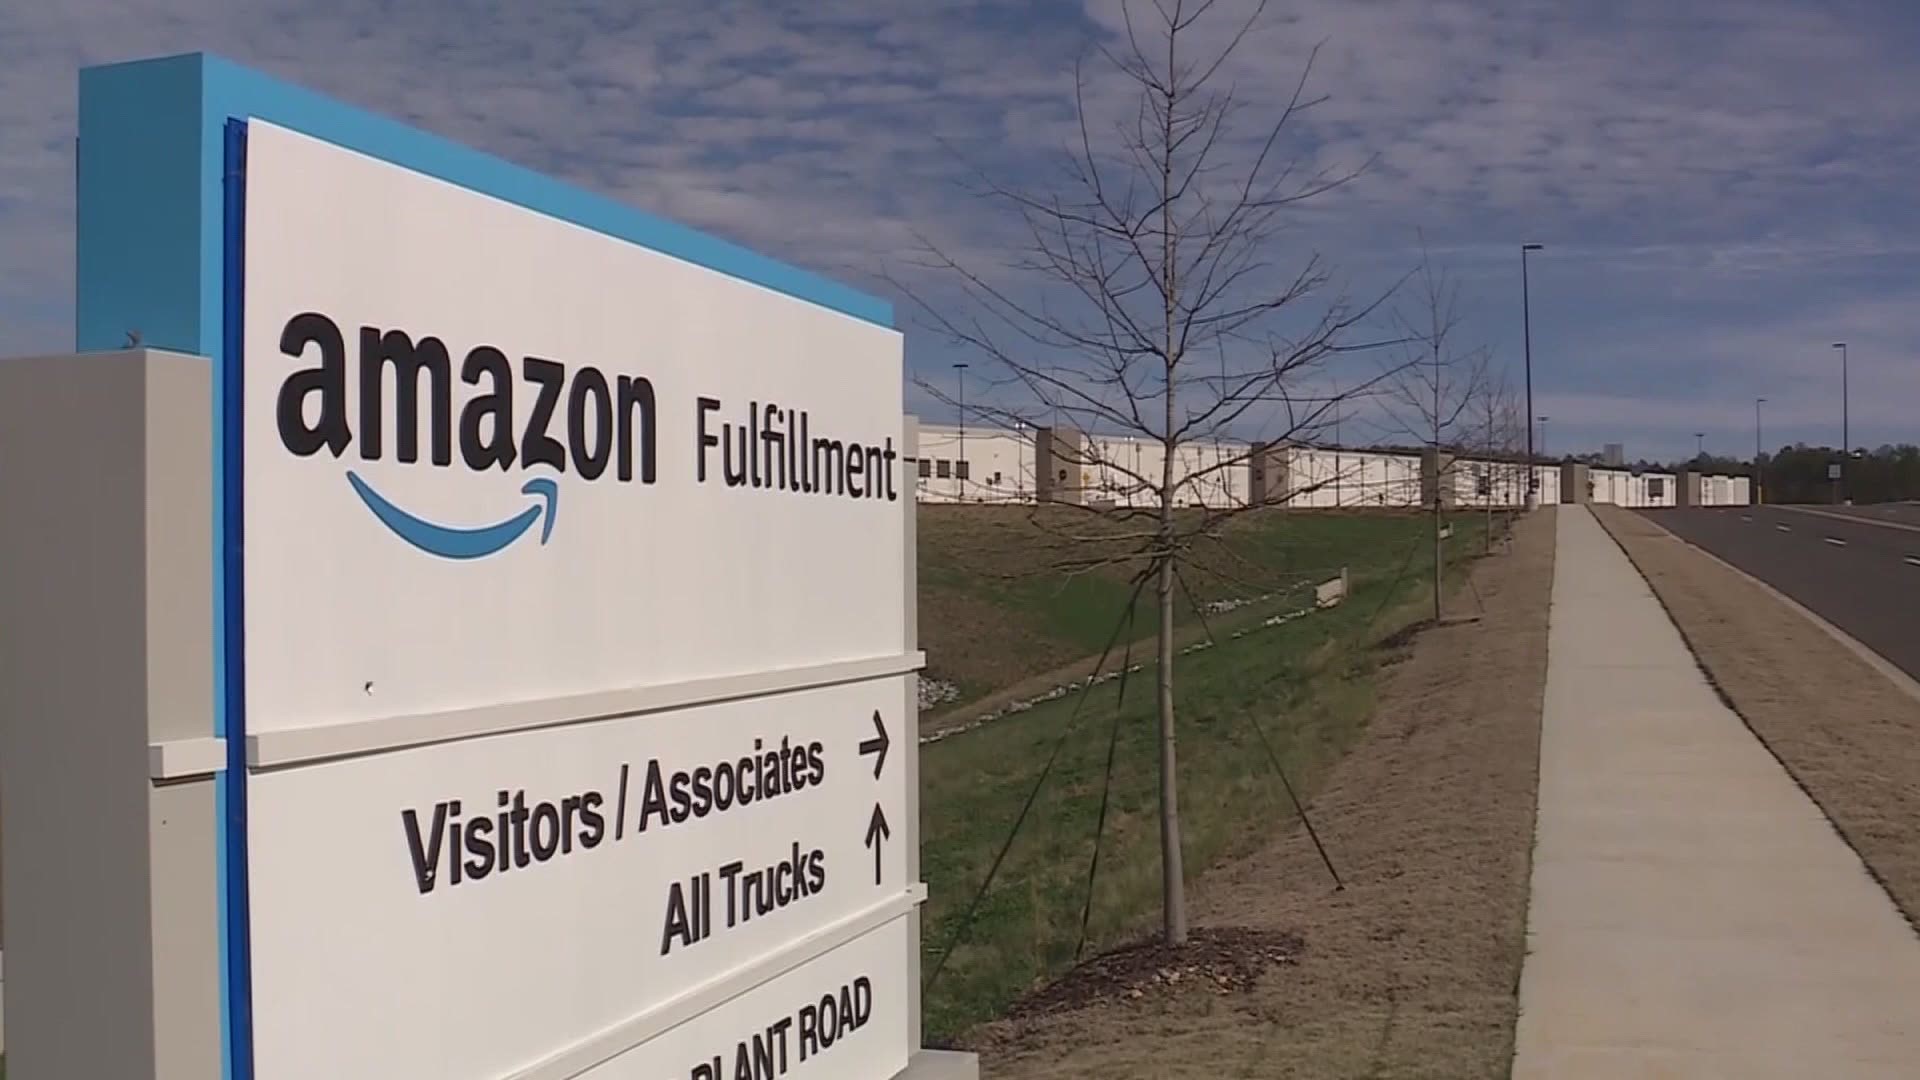 Amazon crossed the threshold to secure a majority of votes, with 1,798 warehouse workers voting against the union and 738 votes in favor.